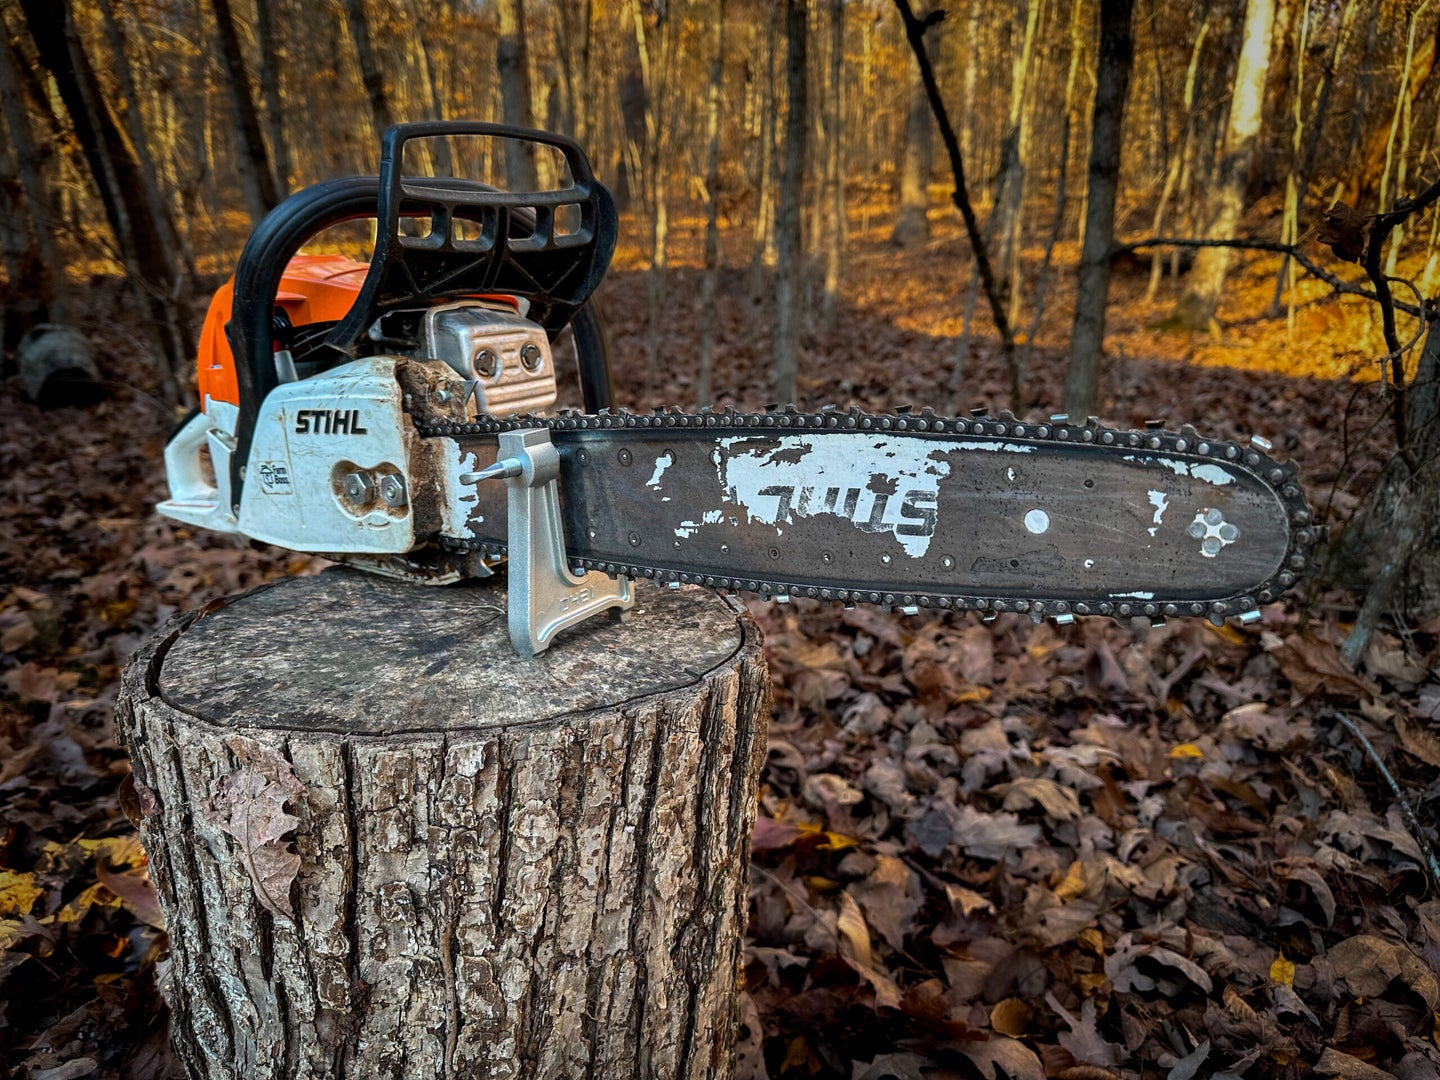 A chainsaw rests on a treestump in a forest with leaves on the ground.